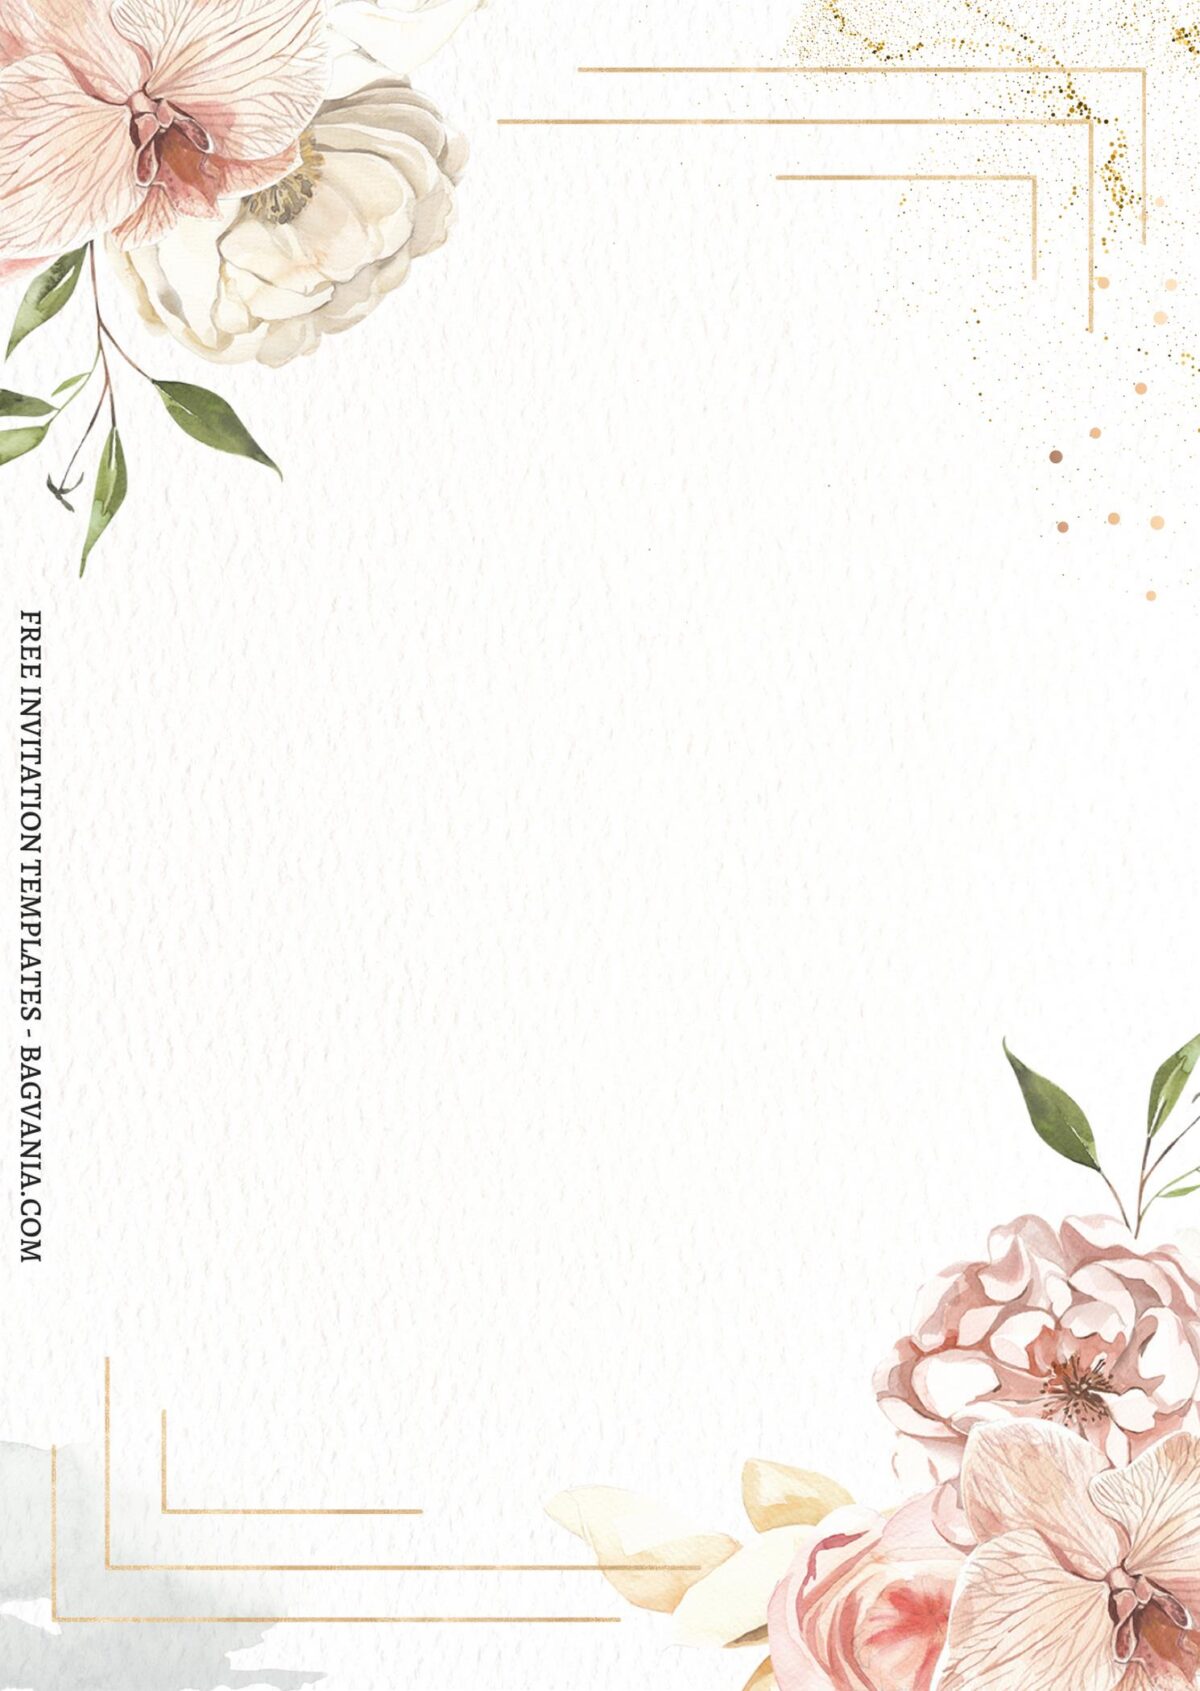 (Free) 7+ Cozy Autumn Floral Canva Birthday Invitation Templates with watercolor peony